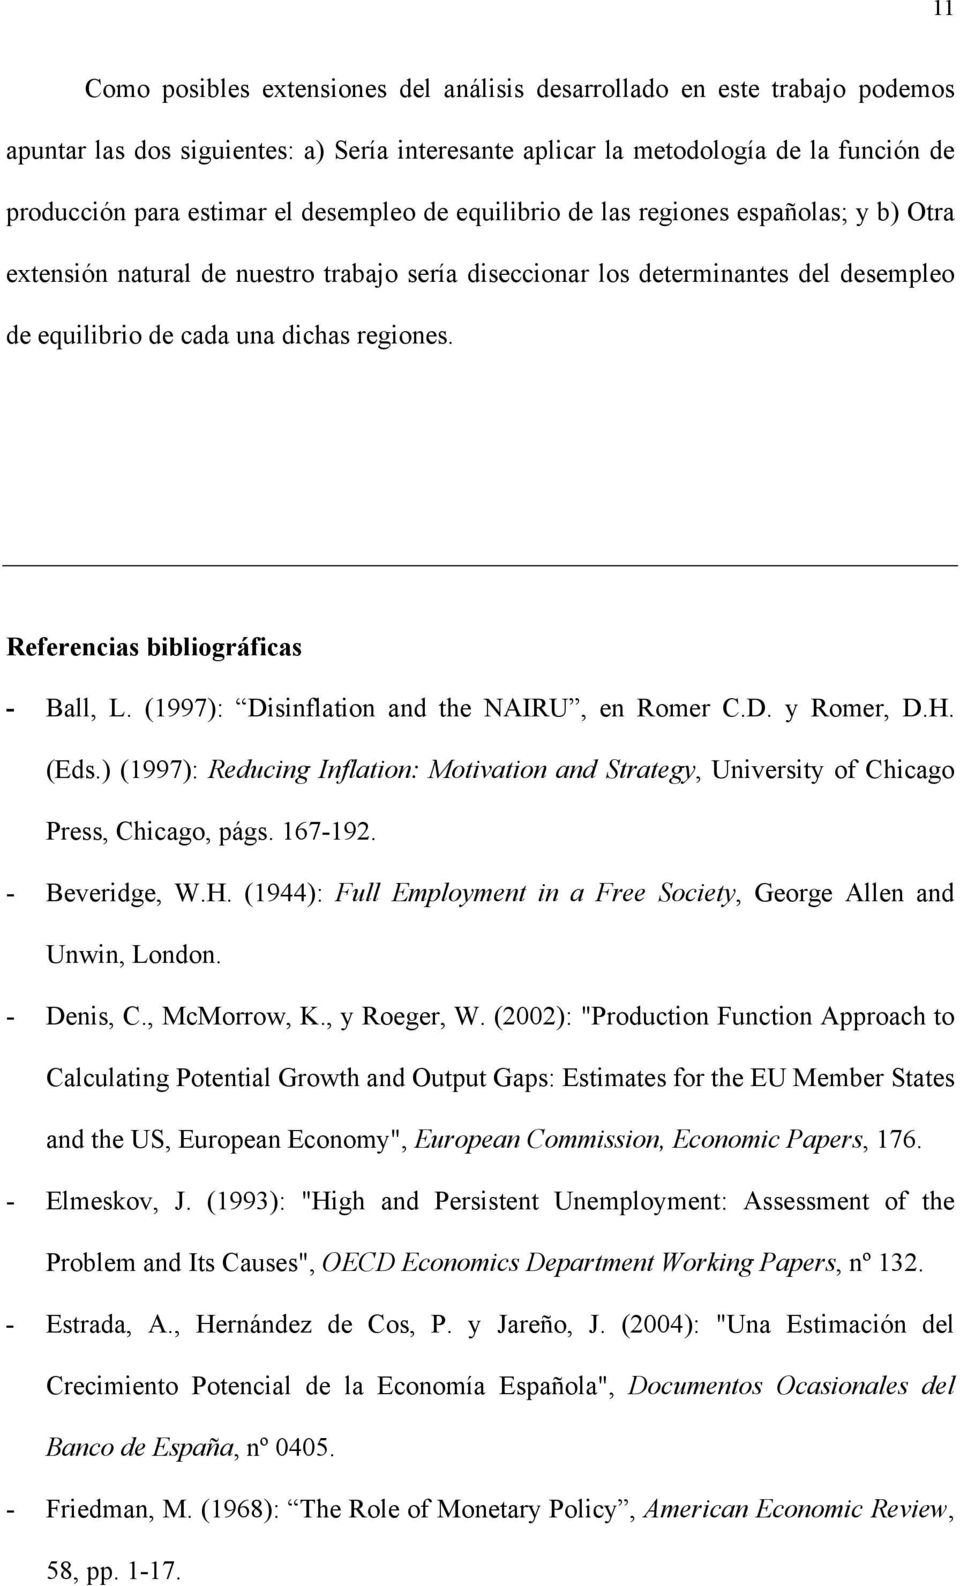 Referencias bibliográficas - Ball, L. (1997): Disinflaion and he NAIRU, en Romer C.D. y Romer, D.H. (Eds.) (1997): Reducing Inflaion: Moivaion and Sraegy, Universiy of Chicago Press, Chicago, págs.